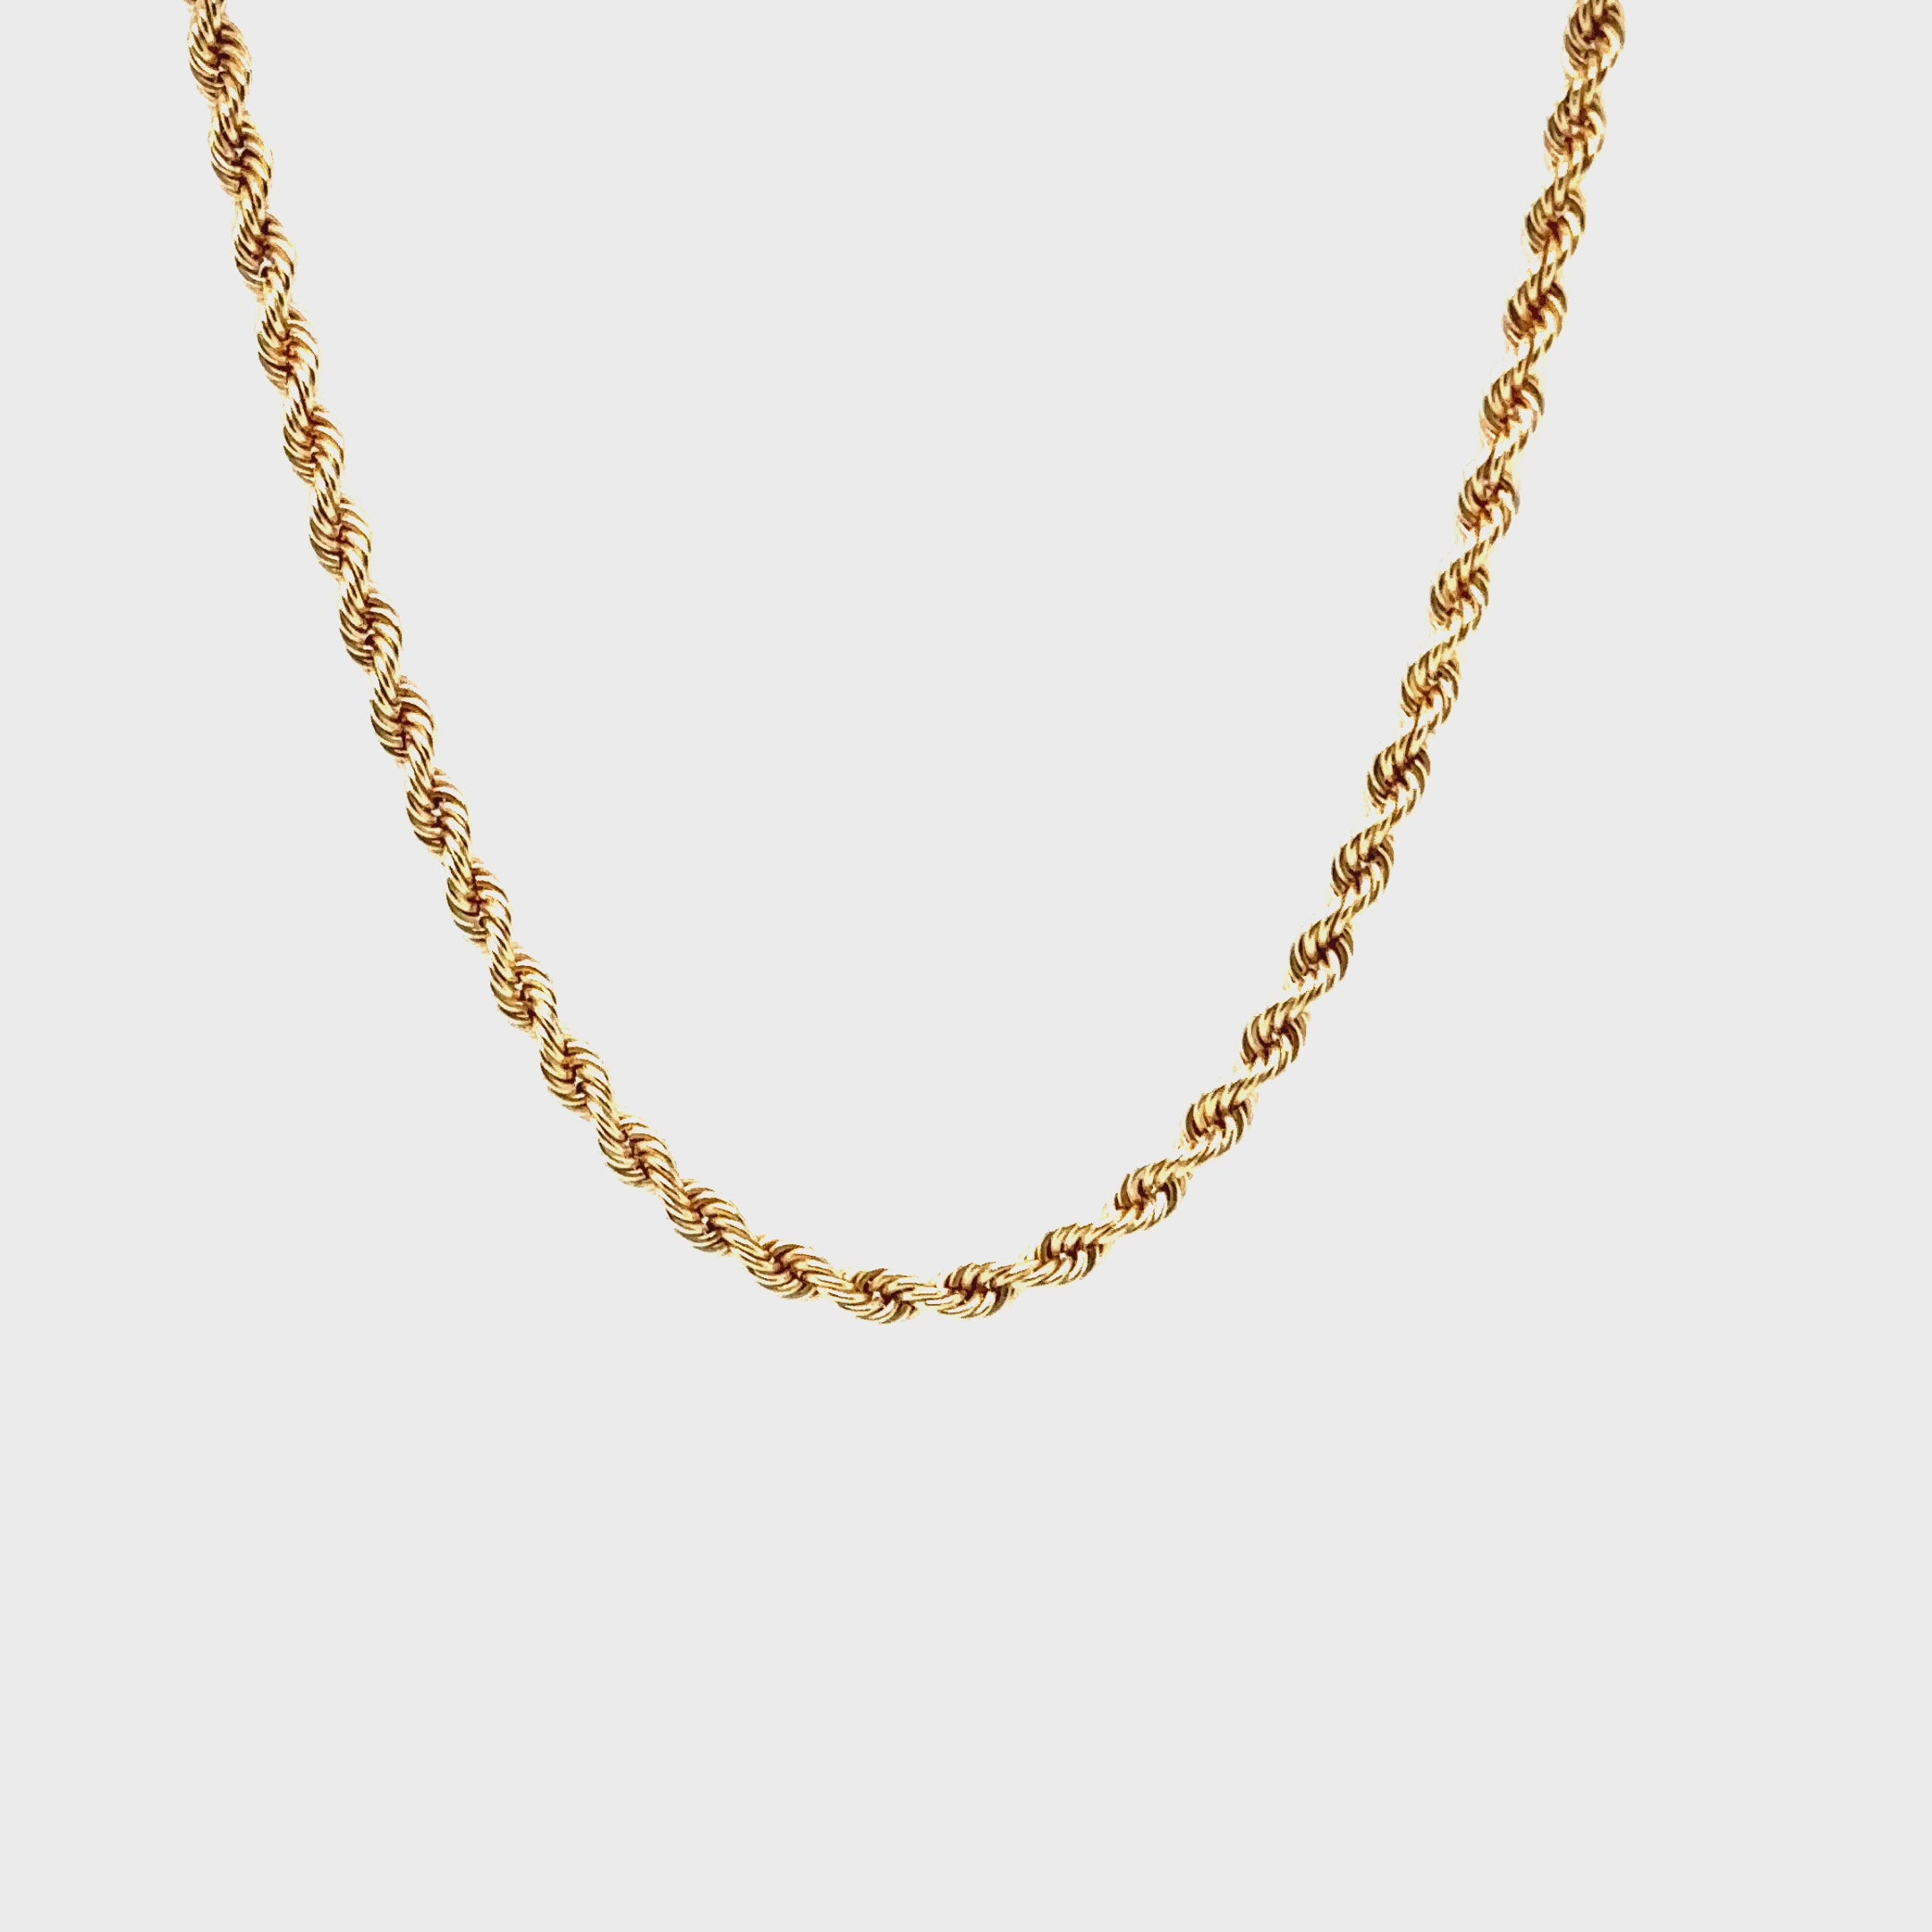 14K Solid Gold Twist-Rope Chain Necklace 18 2.75mm 13.0 Grams Gold Chain Gold Necklace Estate Necklace Vintage Necklace Fine Estate Jewelry